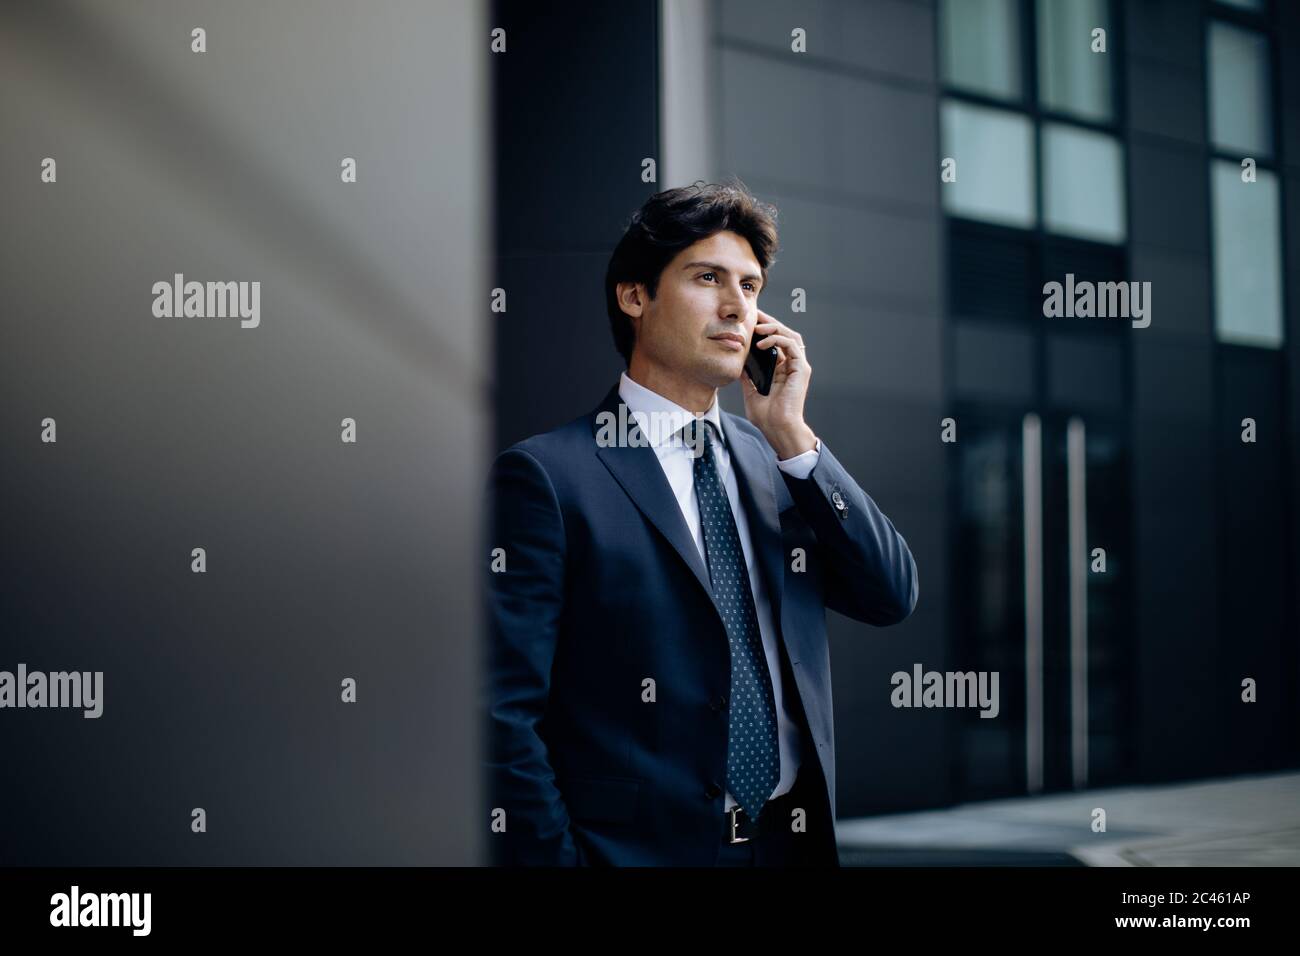 Businessman using smartphone in front of office building Stock Photo